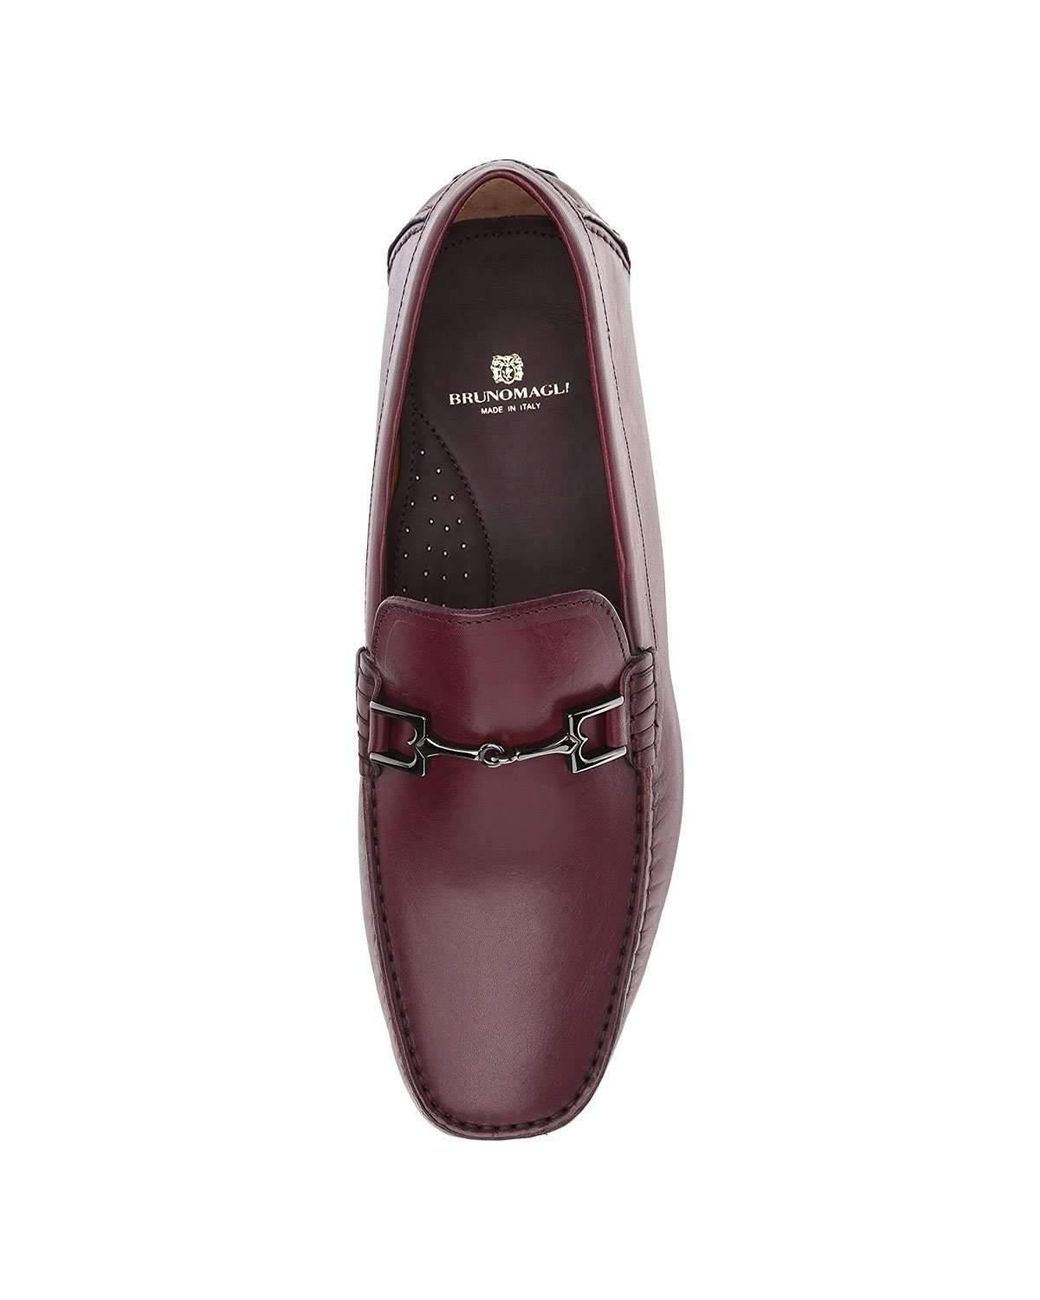 Bruno Magli Luxury Italian Handcrafted Monza Designer Shoes Calf-skin  Leather Moccasins (bms1001) (special Price) in Red for Men | Lyst